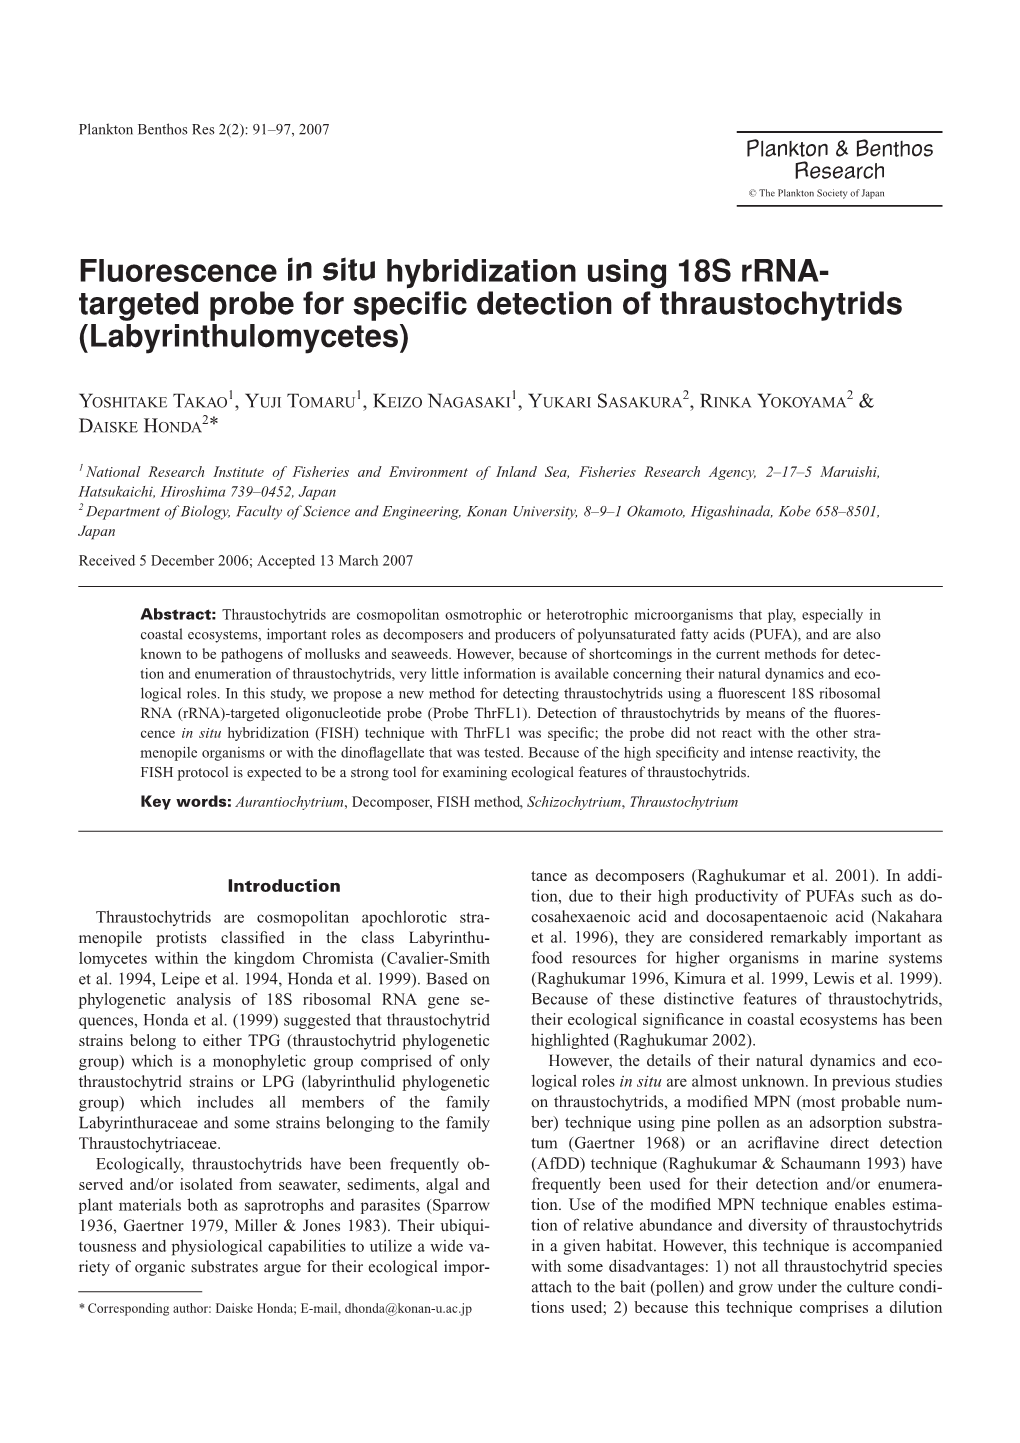 Fluorescence in Situ Hybridization Using 18S Rrna- Targeted Probe for Speciﬁc Detection of Thraustochytrids (Labyrinthulomycetes)